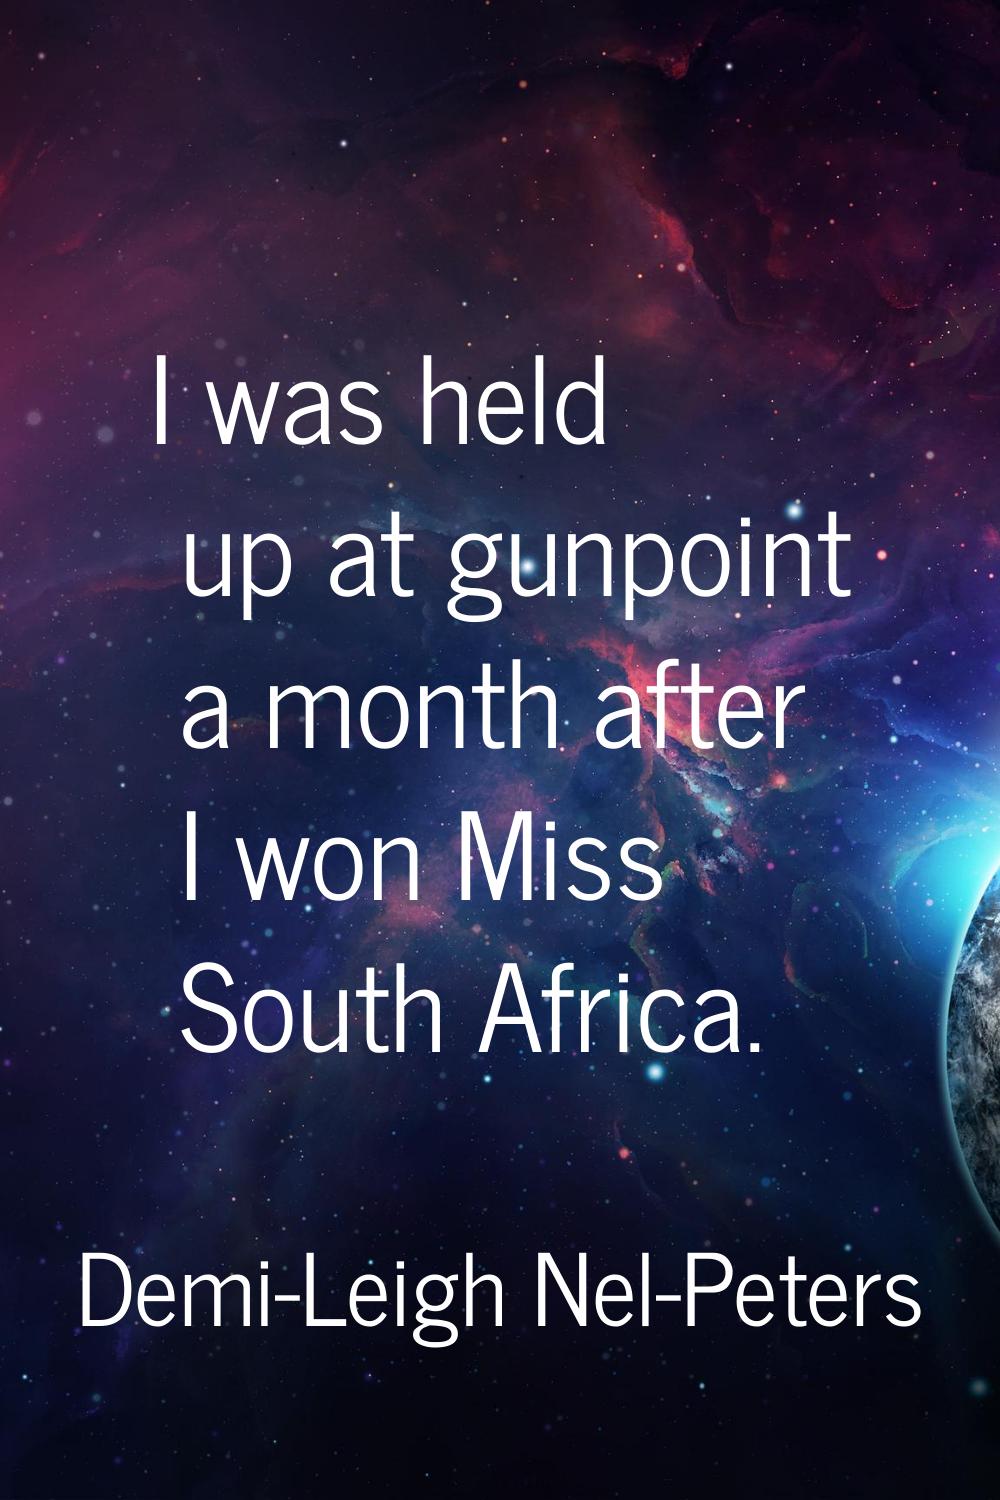 I was held up at gunpoint a month after I won Miss South Africa.